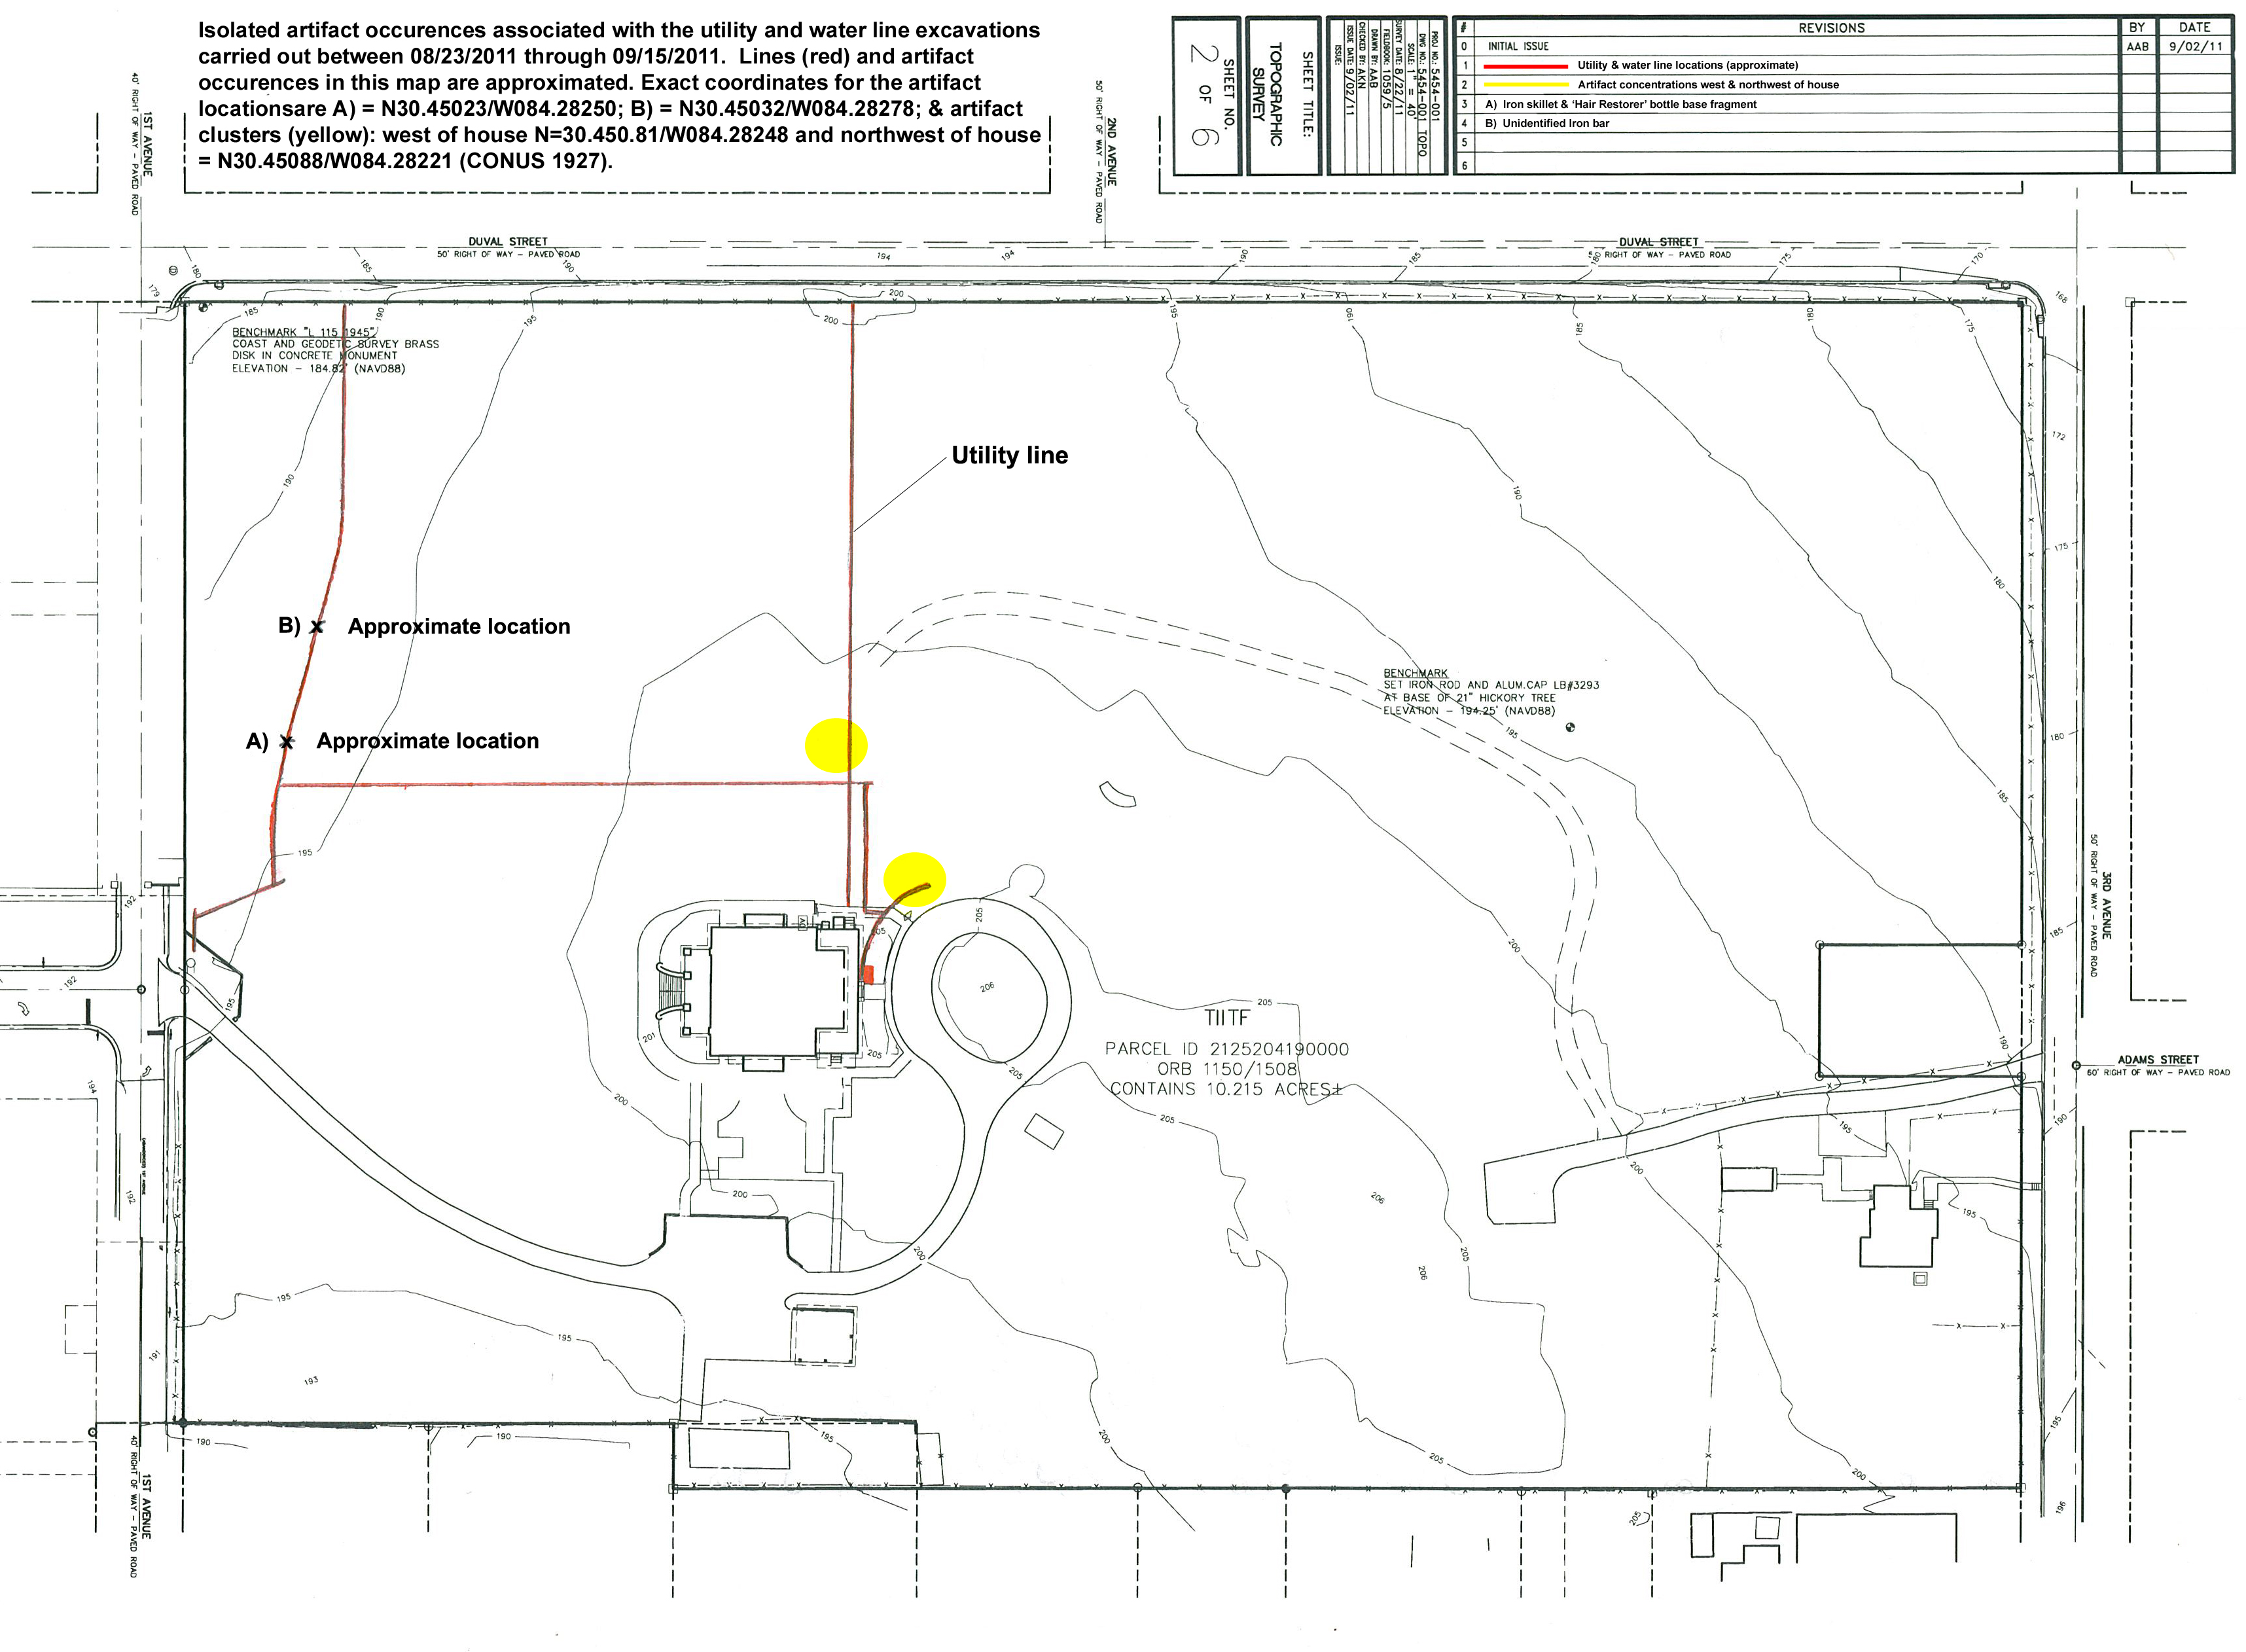 Site plan for The Grove showing the location of utility line installation monitored by archaeologists in 2011. Areas highlighted in yellow indicate artifact concentrations. Site plan adapted from a survey by Nobles Consulting Group, Inc. and included in TGAR.